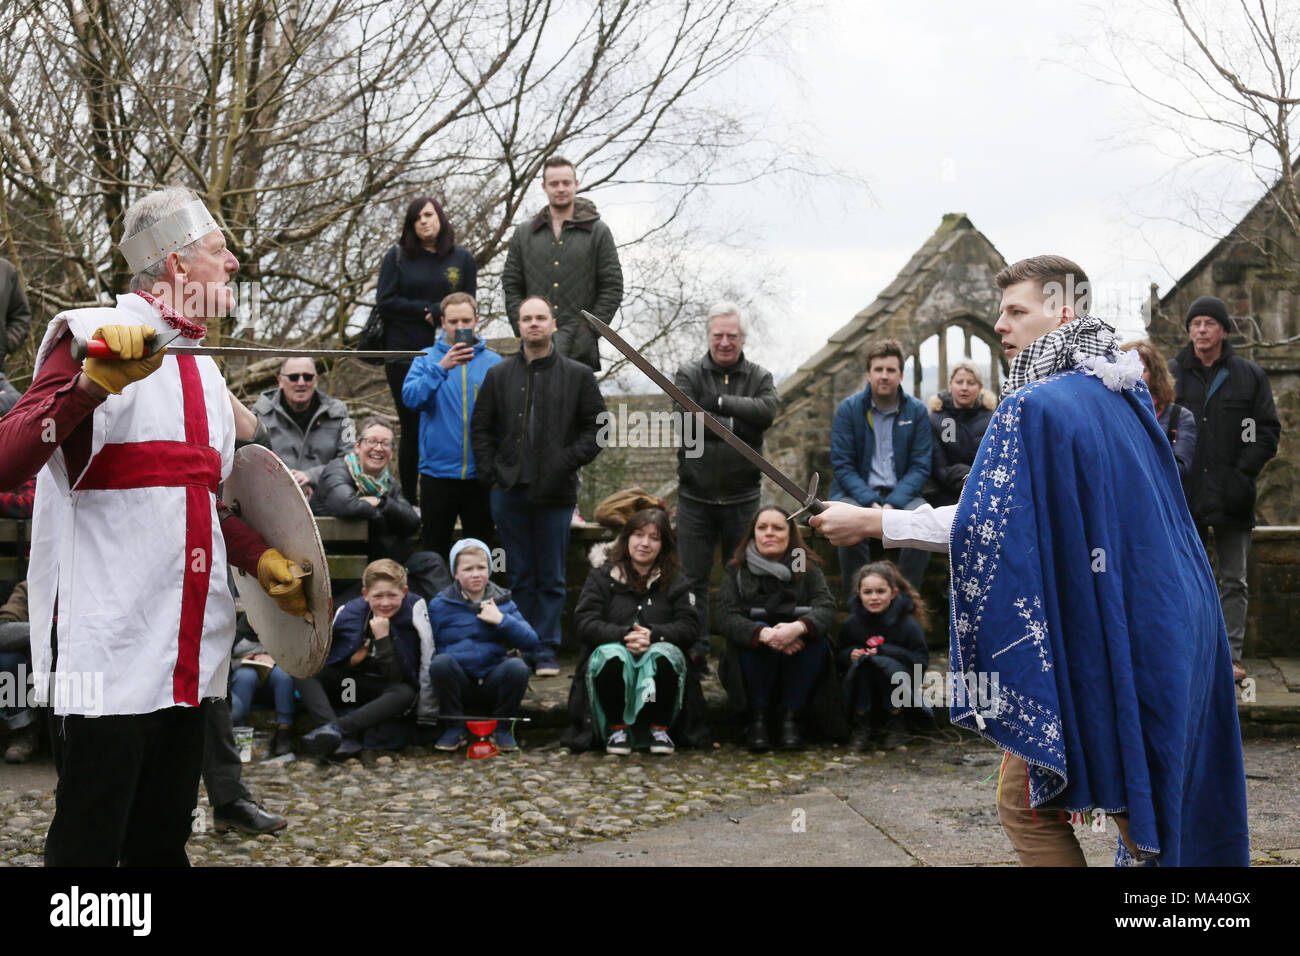 Heptonstall, UK. 30th March, 2018. The Heptonstall Players entertain with the annual traditional Pace Egg Play taking place throughout Good Friday in the historical village of Heptonstall, 30th March, 2018 (C)Barbara Cook/Alamy Live News Stock Photo